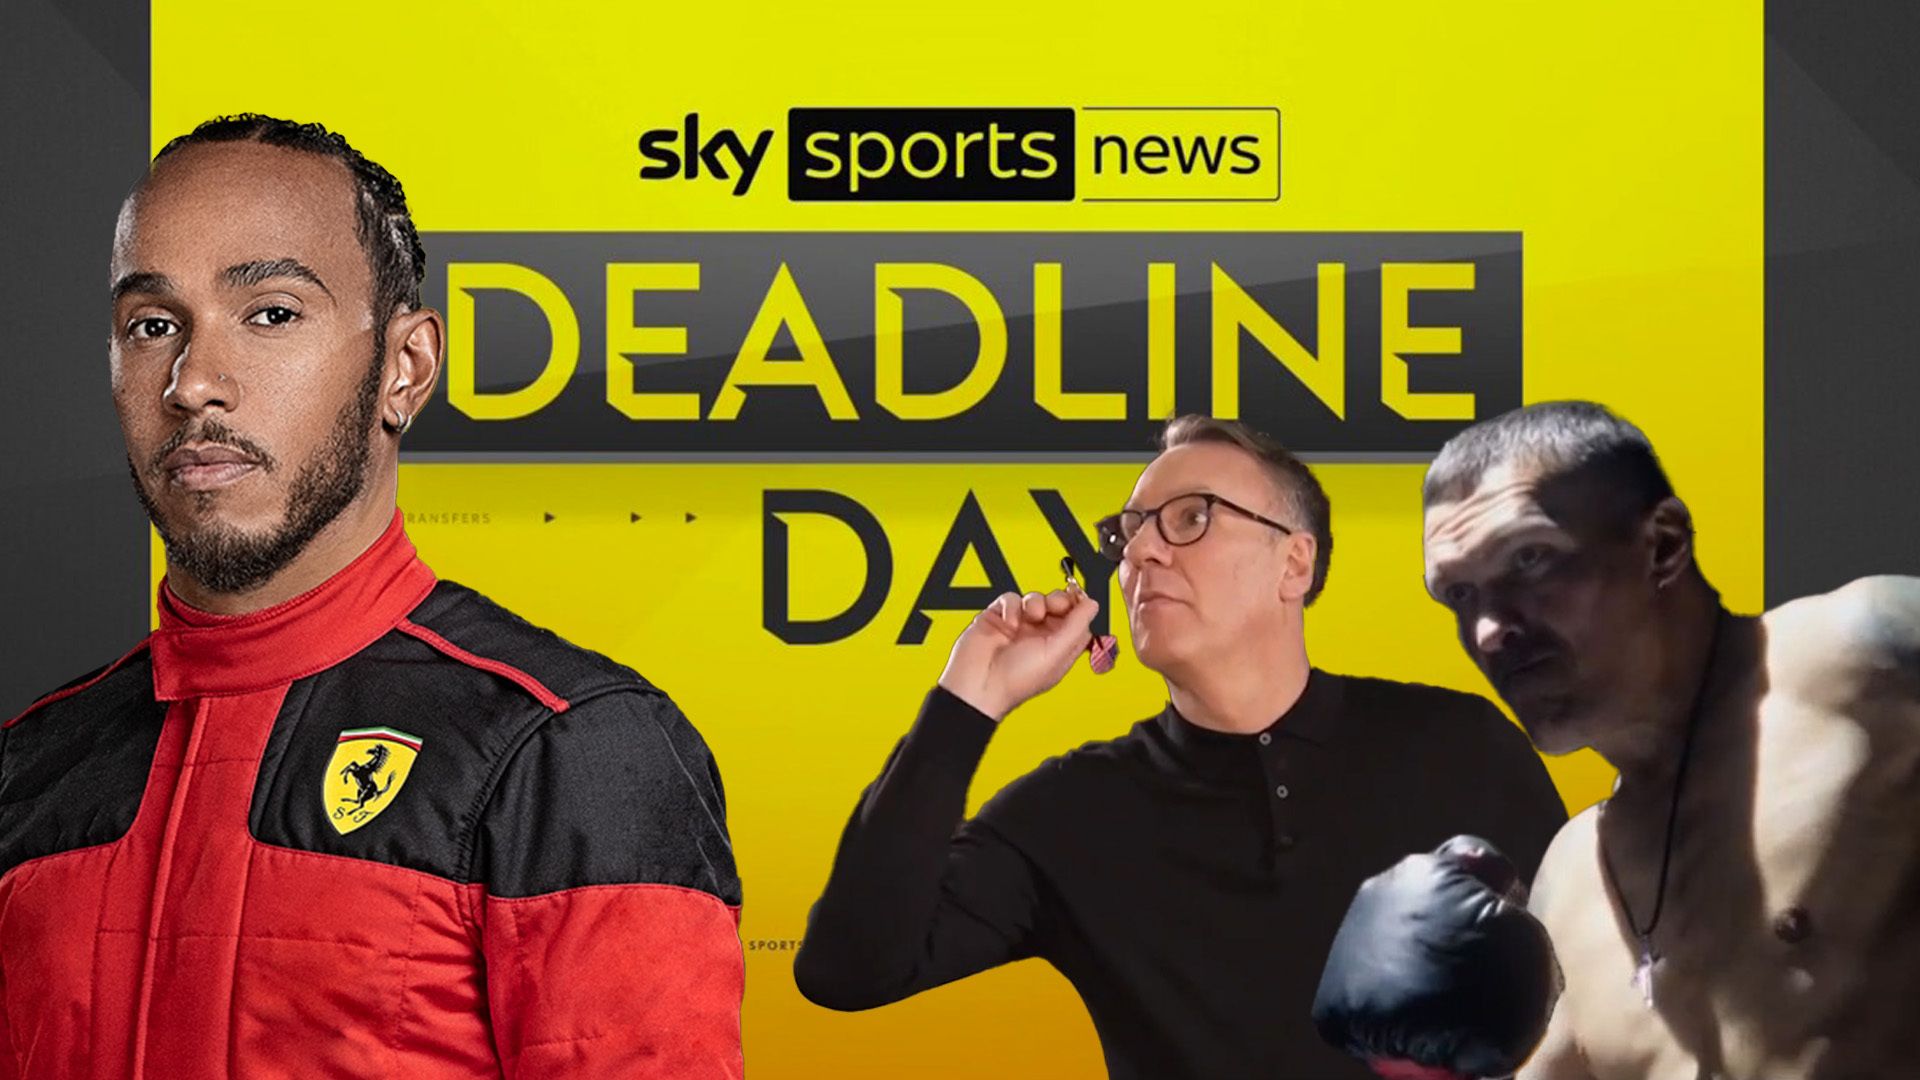 The story of Deadline Day and how Darts, F1 and Boxing tried to steal the show!